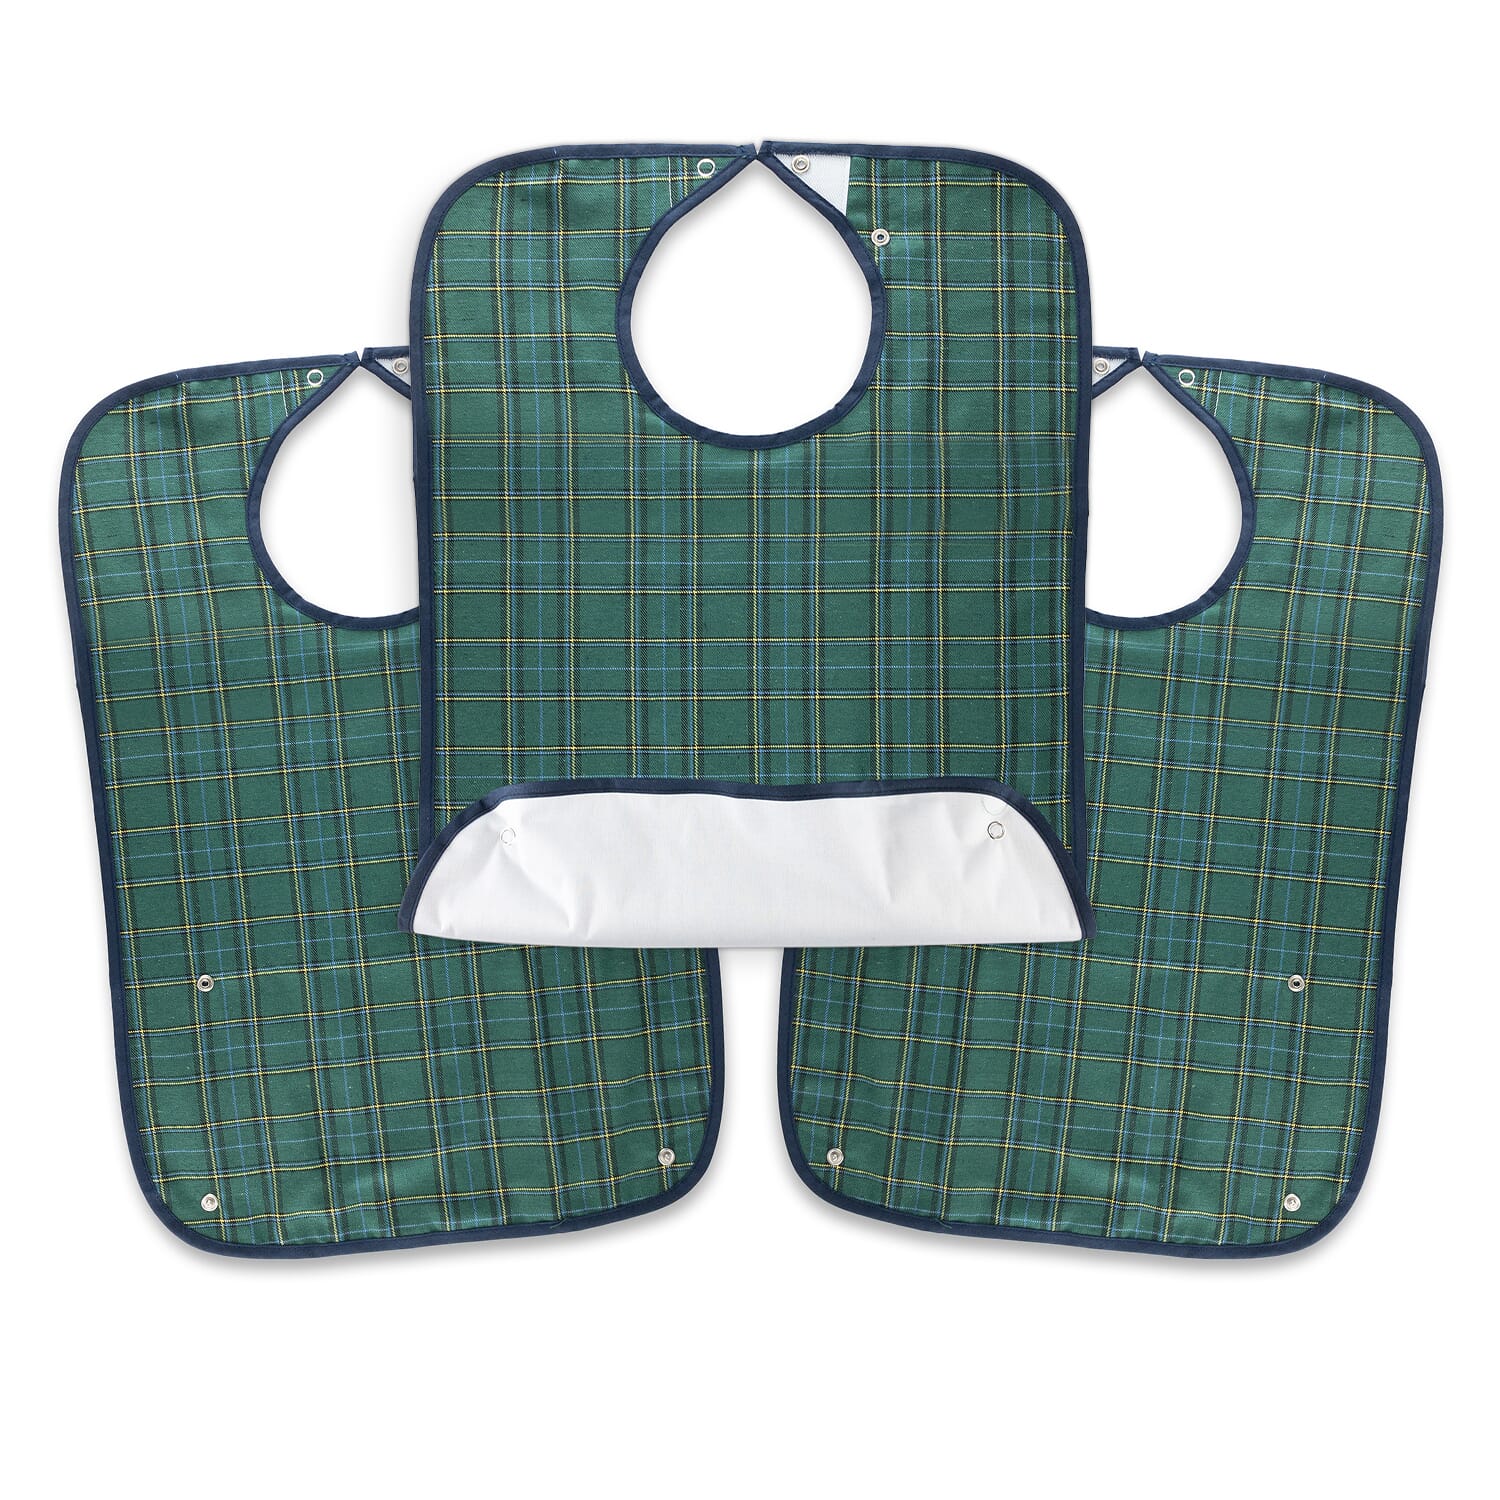 View Everyday Bib Small Green Pack of 3 information